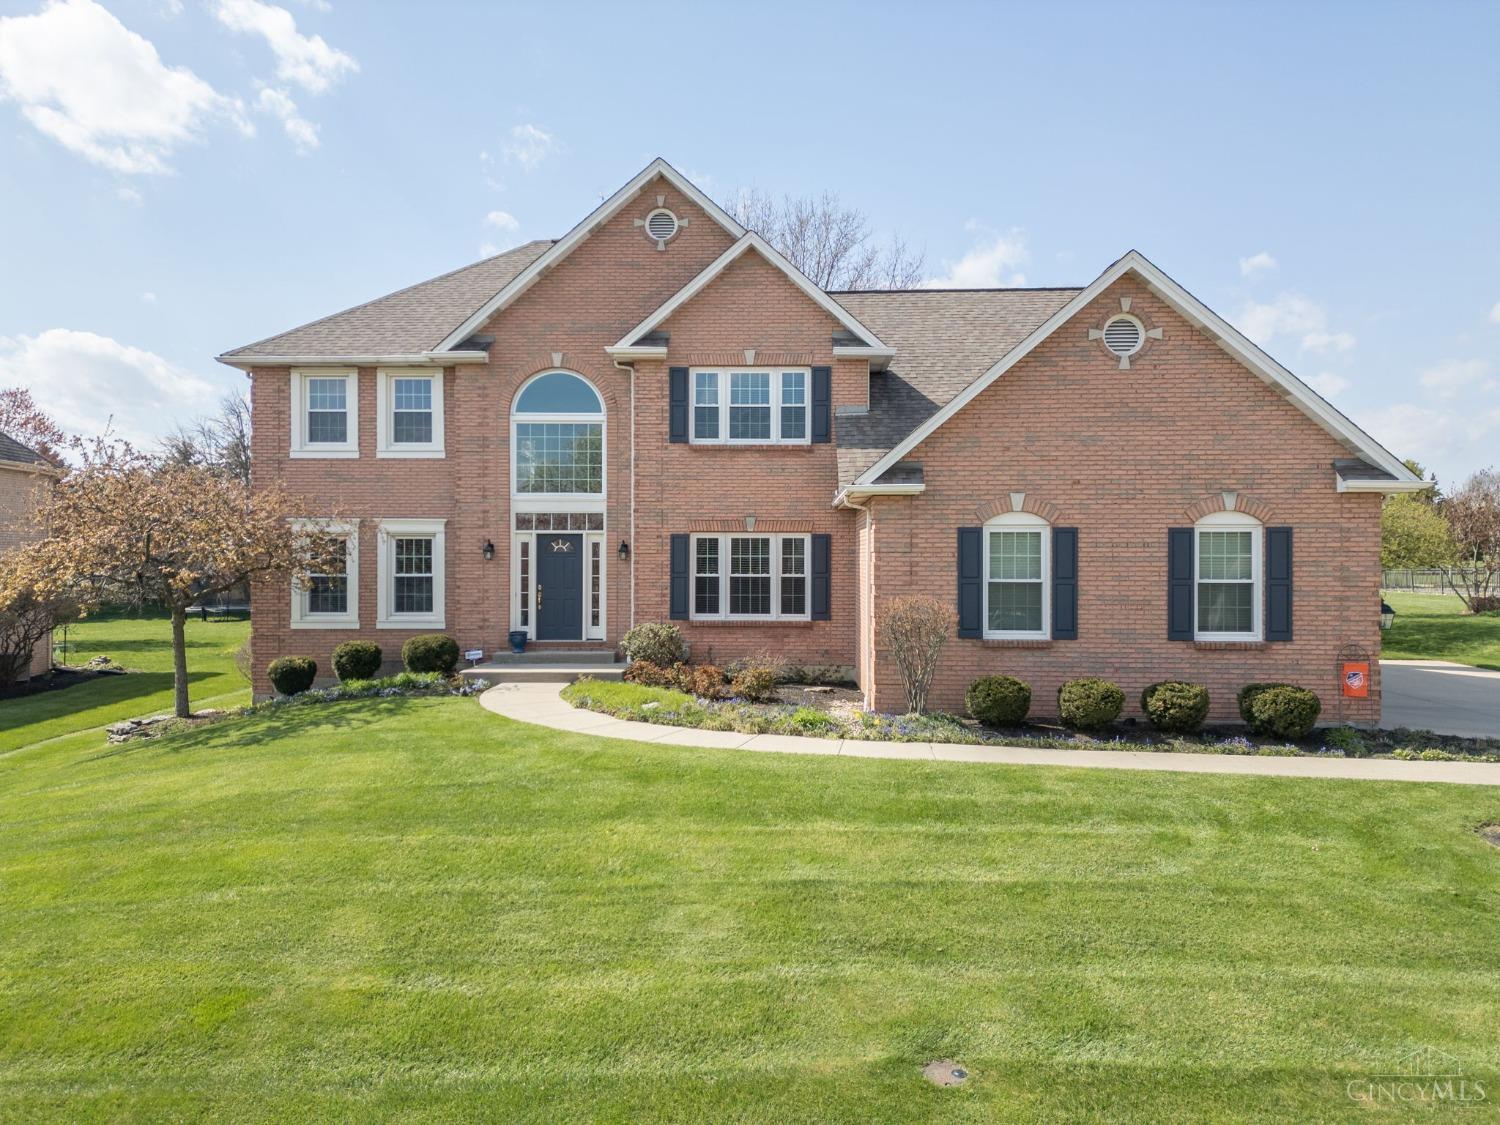 7651 Walnut Creek Ct, West Chester, OH 